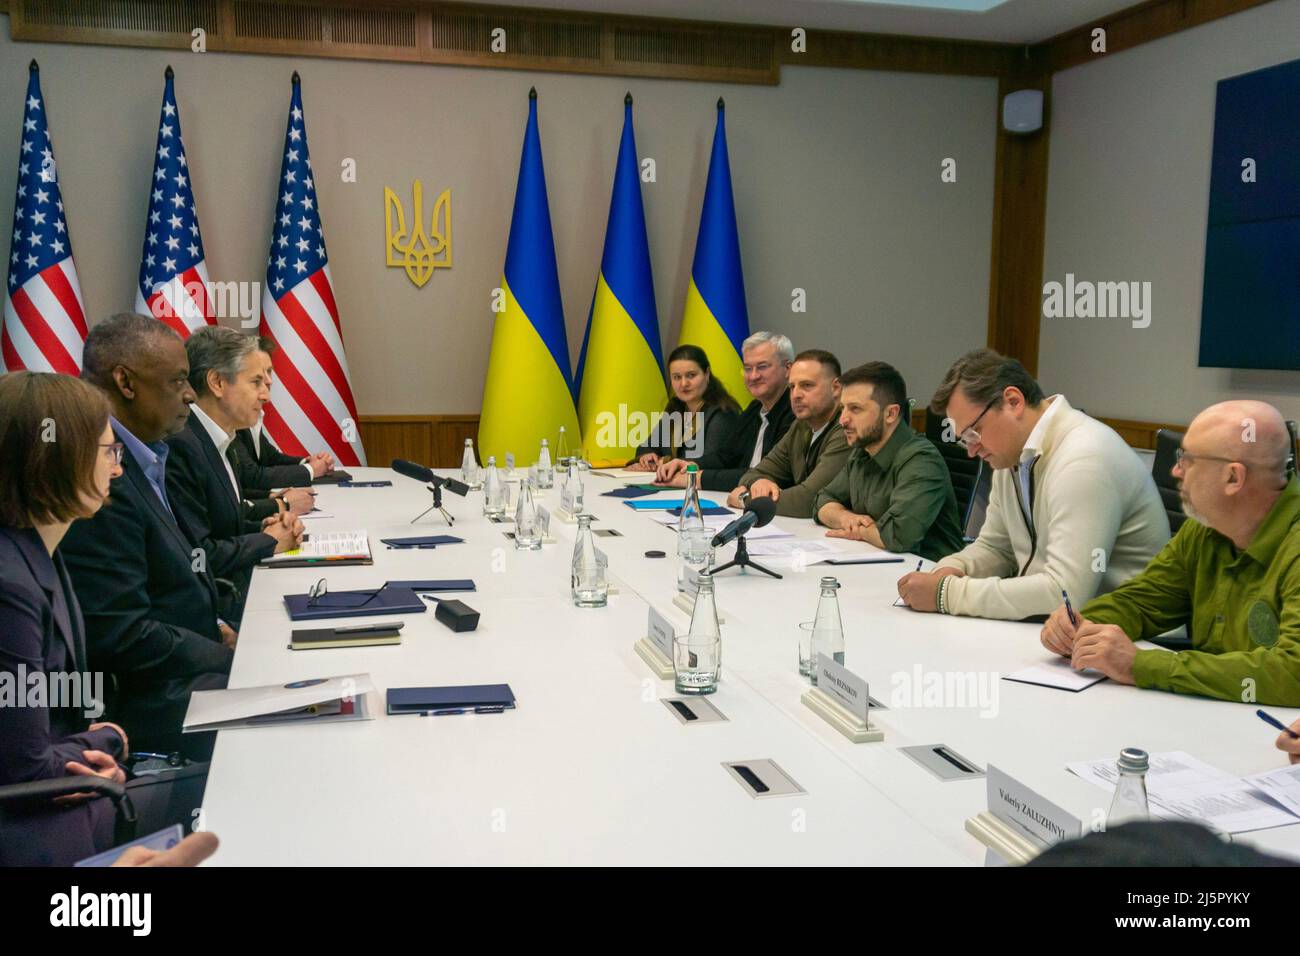 U.S. Secretary of State Antony J. Blinken and U.S. Secretary of Defense Lloyd J. Austin III visit Ukrainian President Volomydyr Zelensky and high ranking government officials in Kyiv, Ukraine, on April 24, 2022. The leaders talked about US arms and military aid, moving the U.S. Embassy back to Kyiv and humanitarian aid. Stock Photo